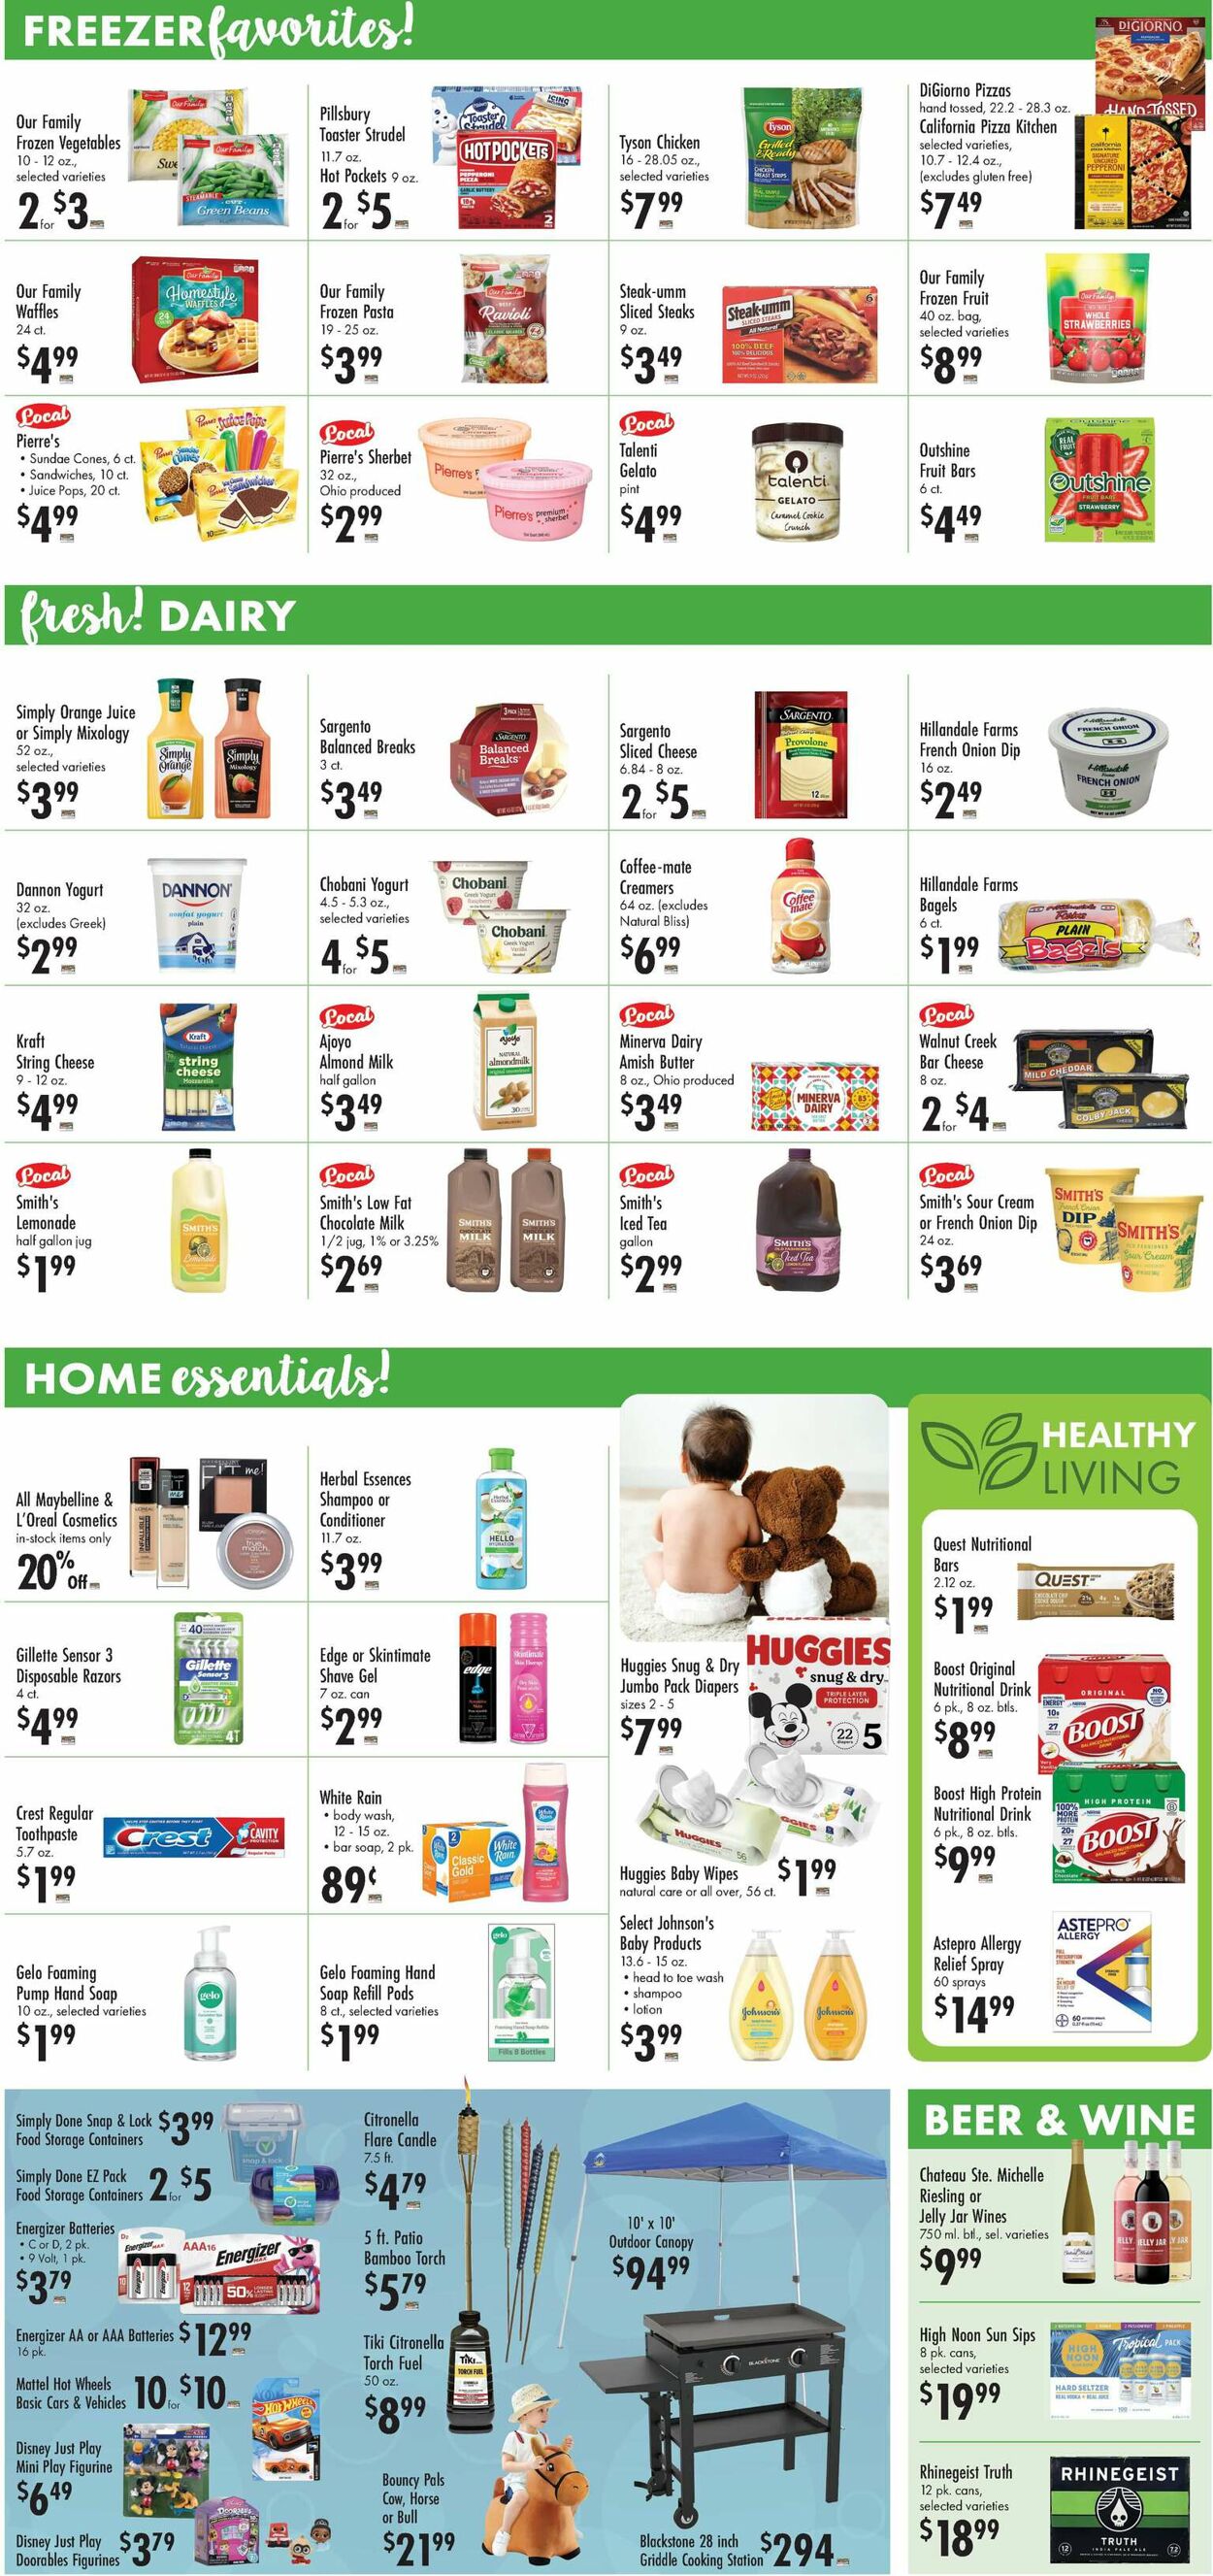 Buehler's Fresh Foods Ad from 07/12/2023